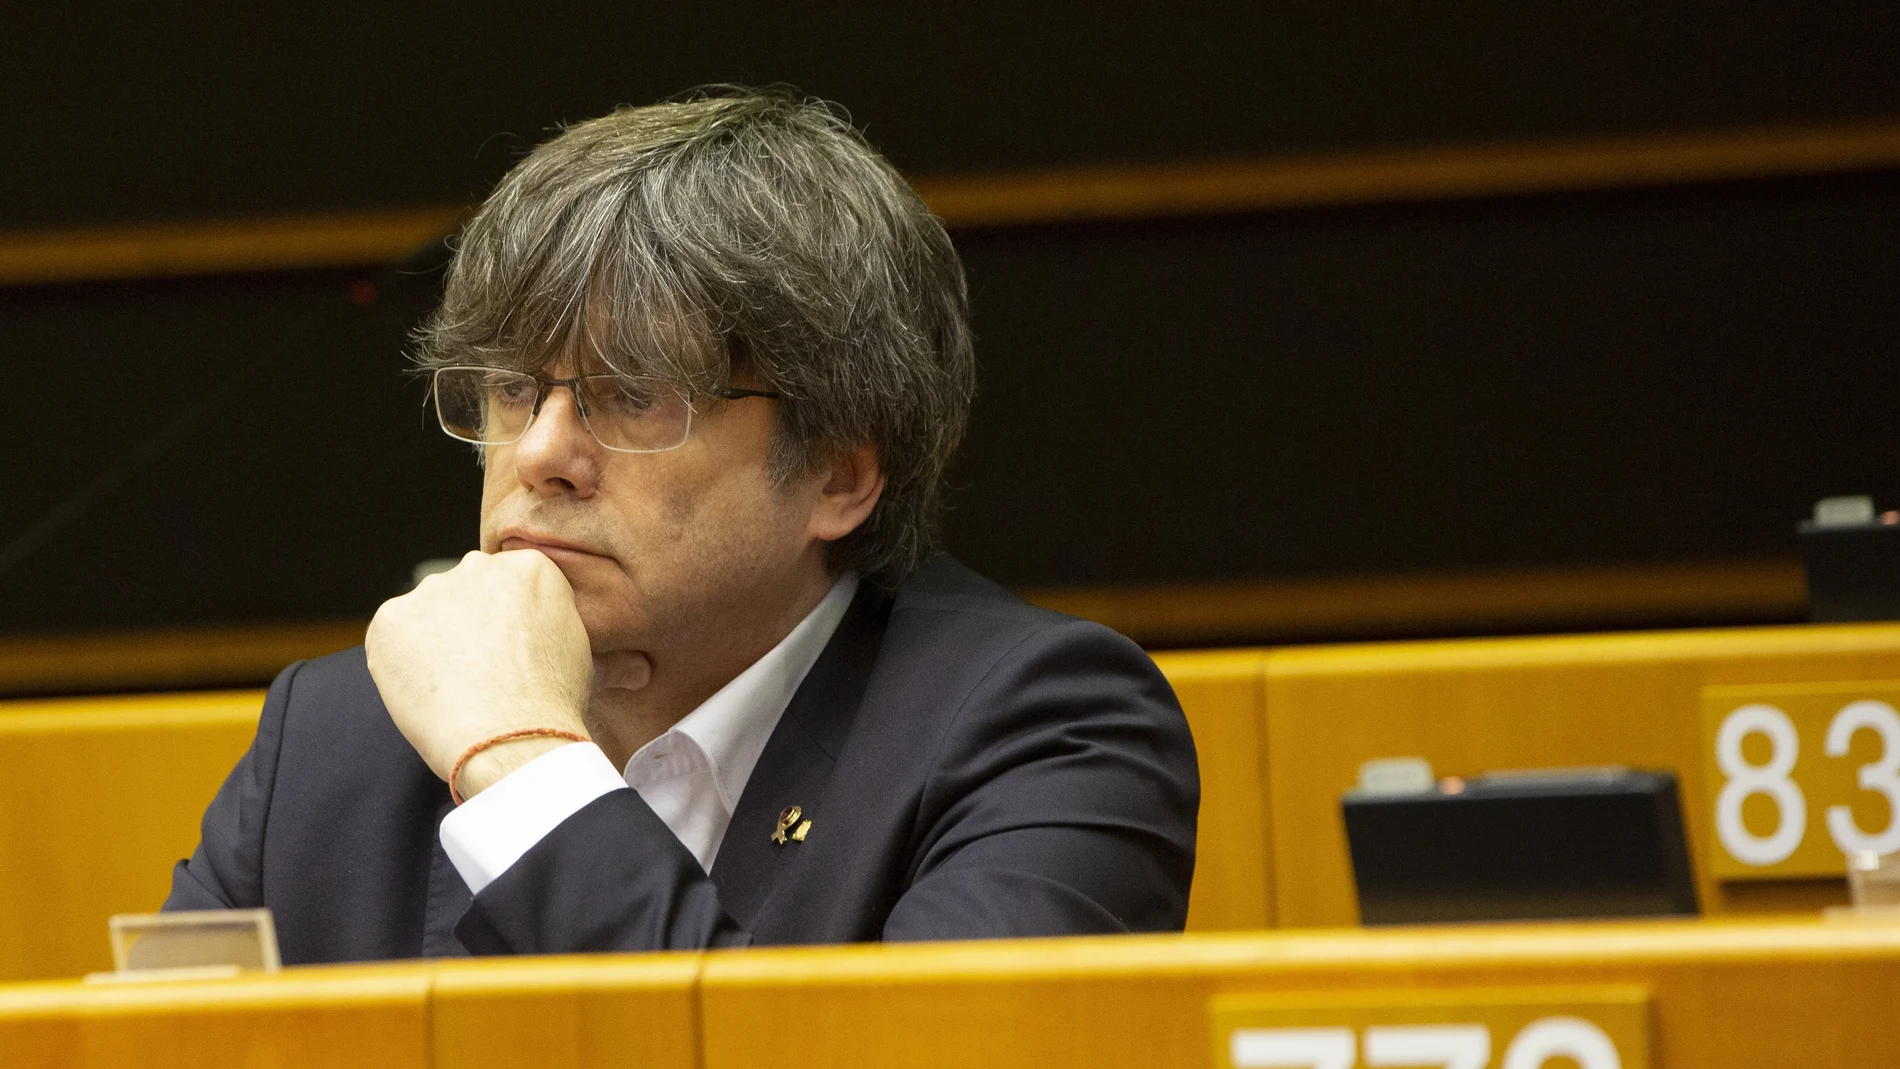 Catalonia's former regional president and MEP Carles Puigdemont listens during a session in the Plenary chamber of the European Parliament in Brussels, Tuesday, March 10, 2020. EU lawmakers were due to take part in a drastically shortened European parliamentary session in Brussels amid concern about the spread of coronavirus. EU leaders were also due to hold a videoconference Tuesday to coordinate efforts across the 27-nation bloc to slow the disease down. (AP Photo/Virginia Mayo)